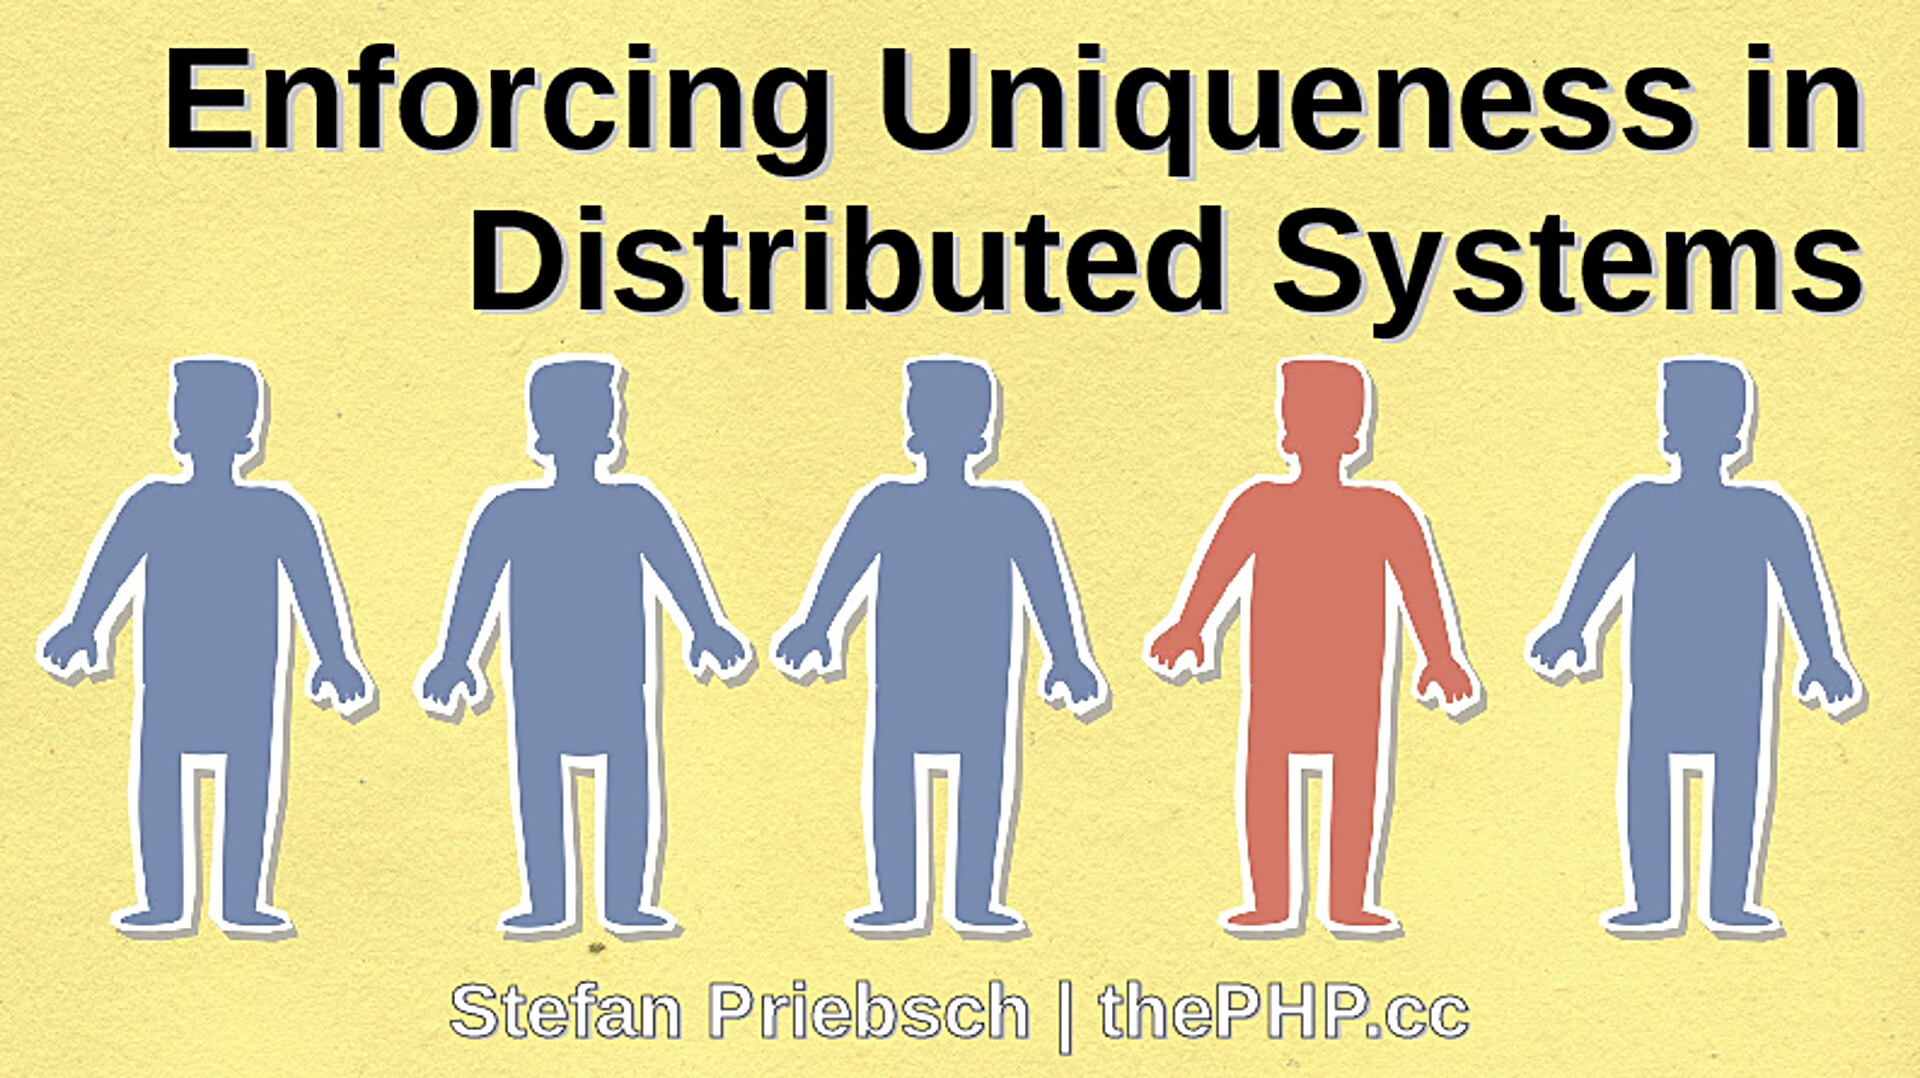 Enforcing Uniqueness in Distributed Systems